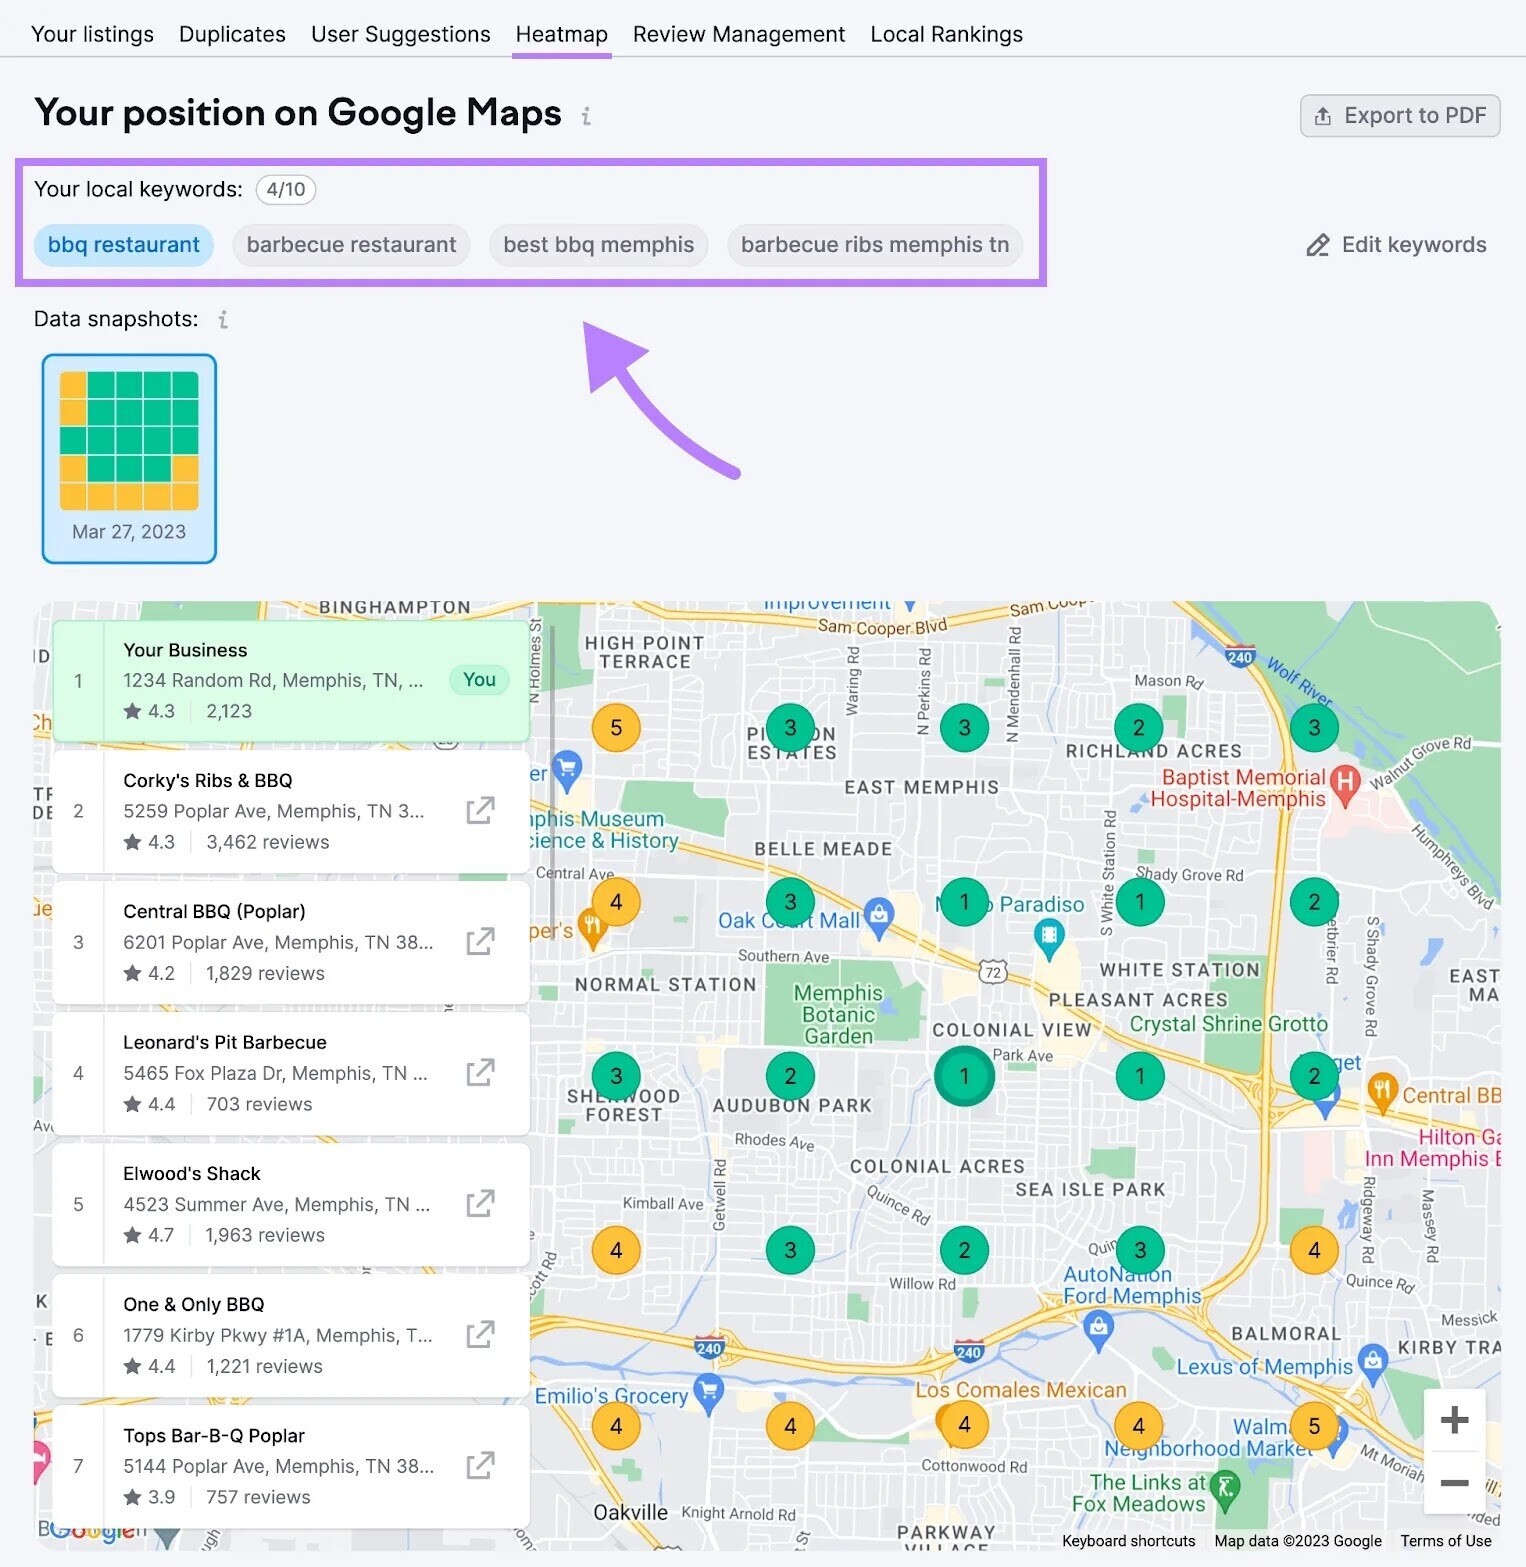 Listing Management tool "Your position on Google Maps" section